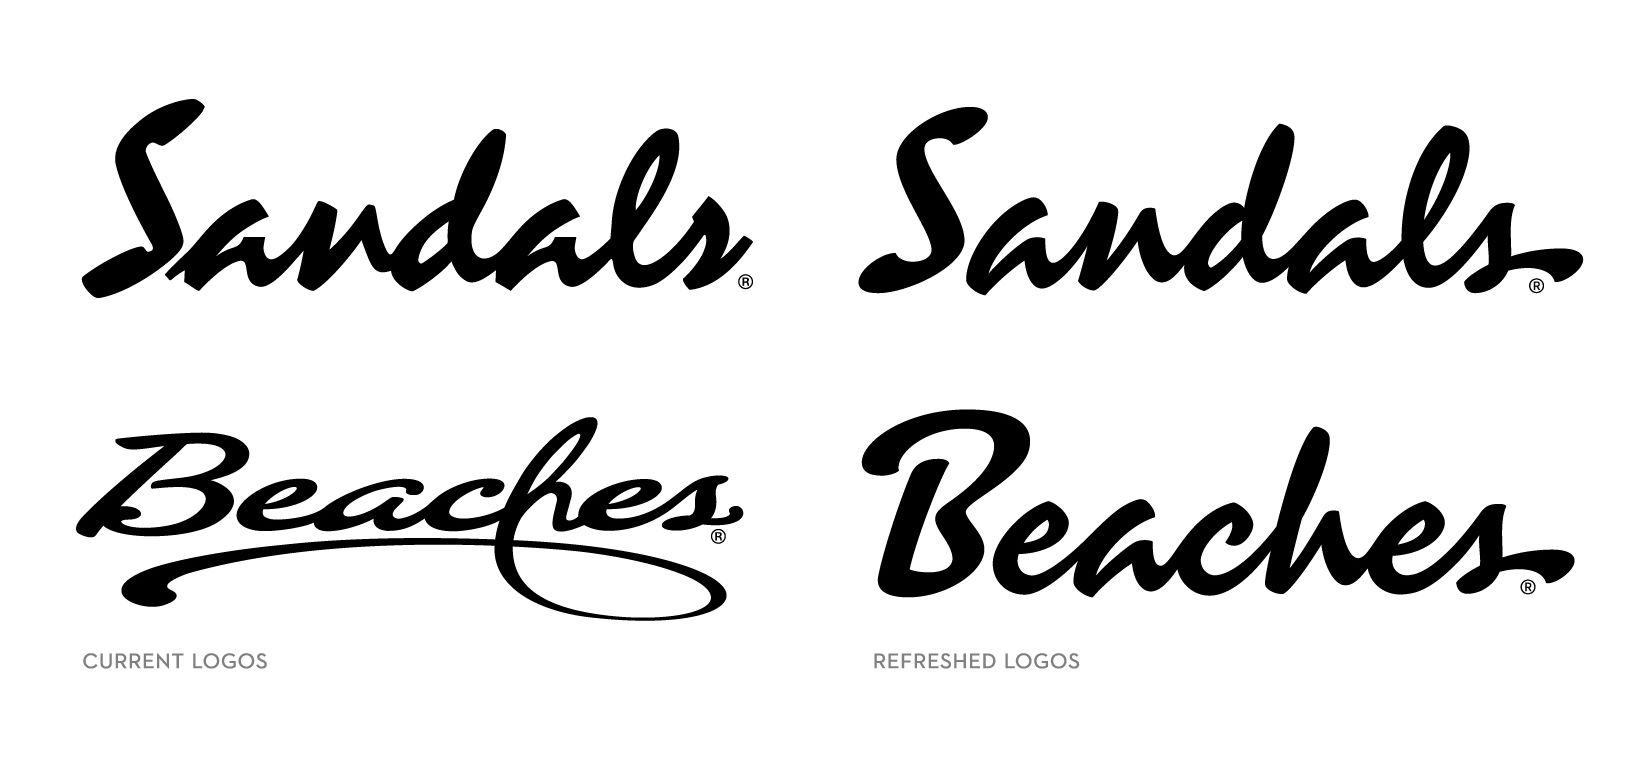 1-House-Ind_Sandals-Beaches_Refreshed-Logos_V3